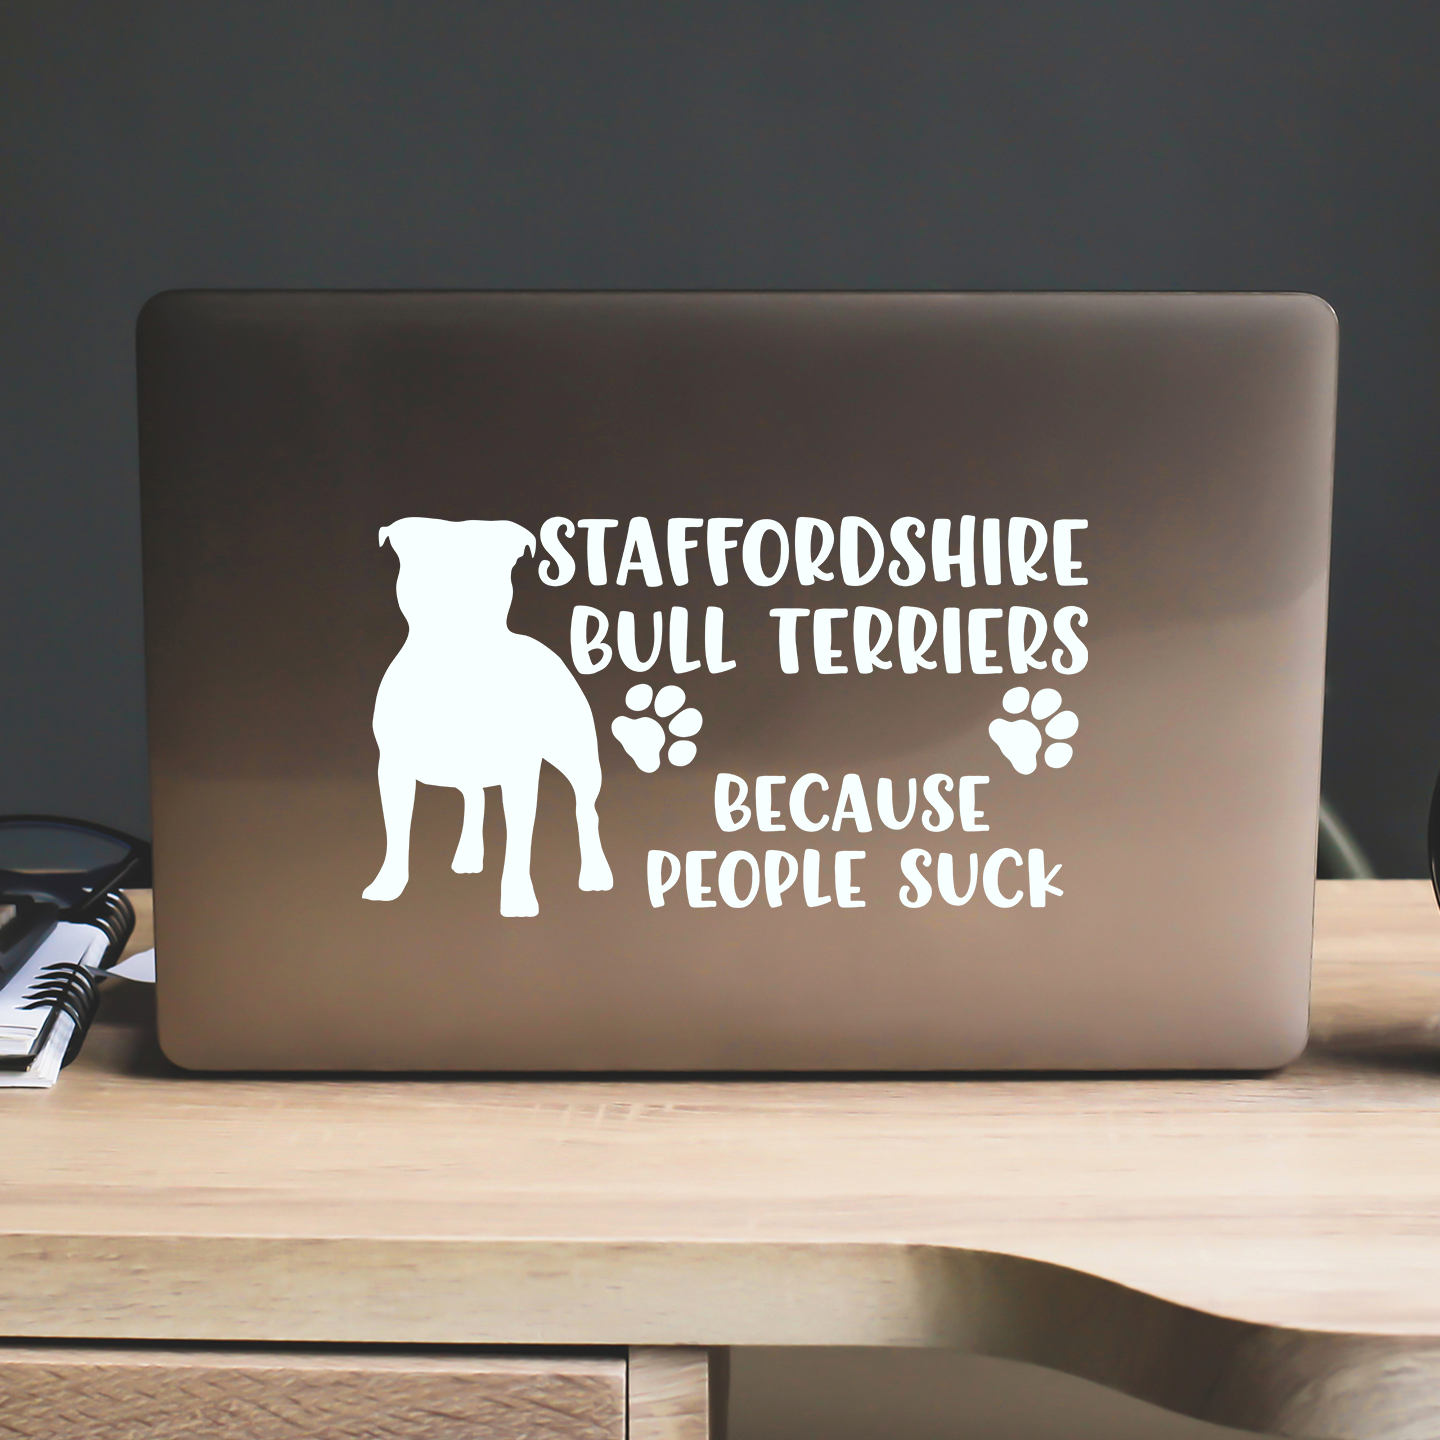 Staffordshire Bull Terriers Because People Suck Sticker